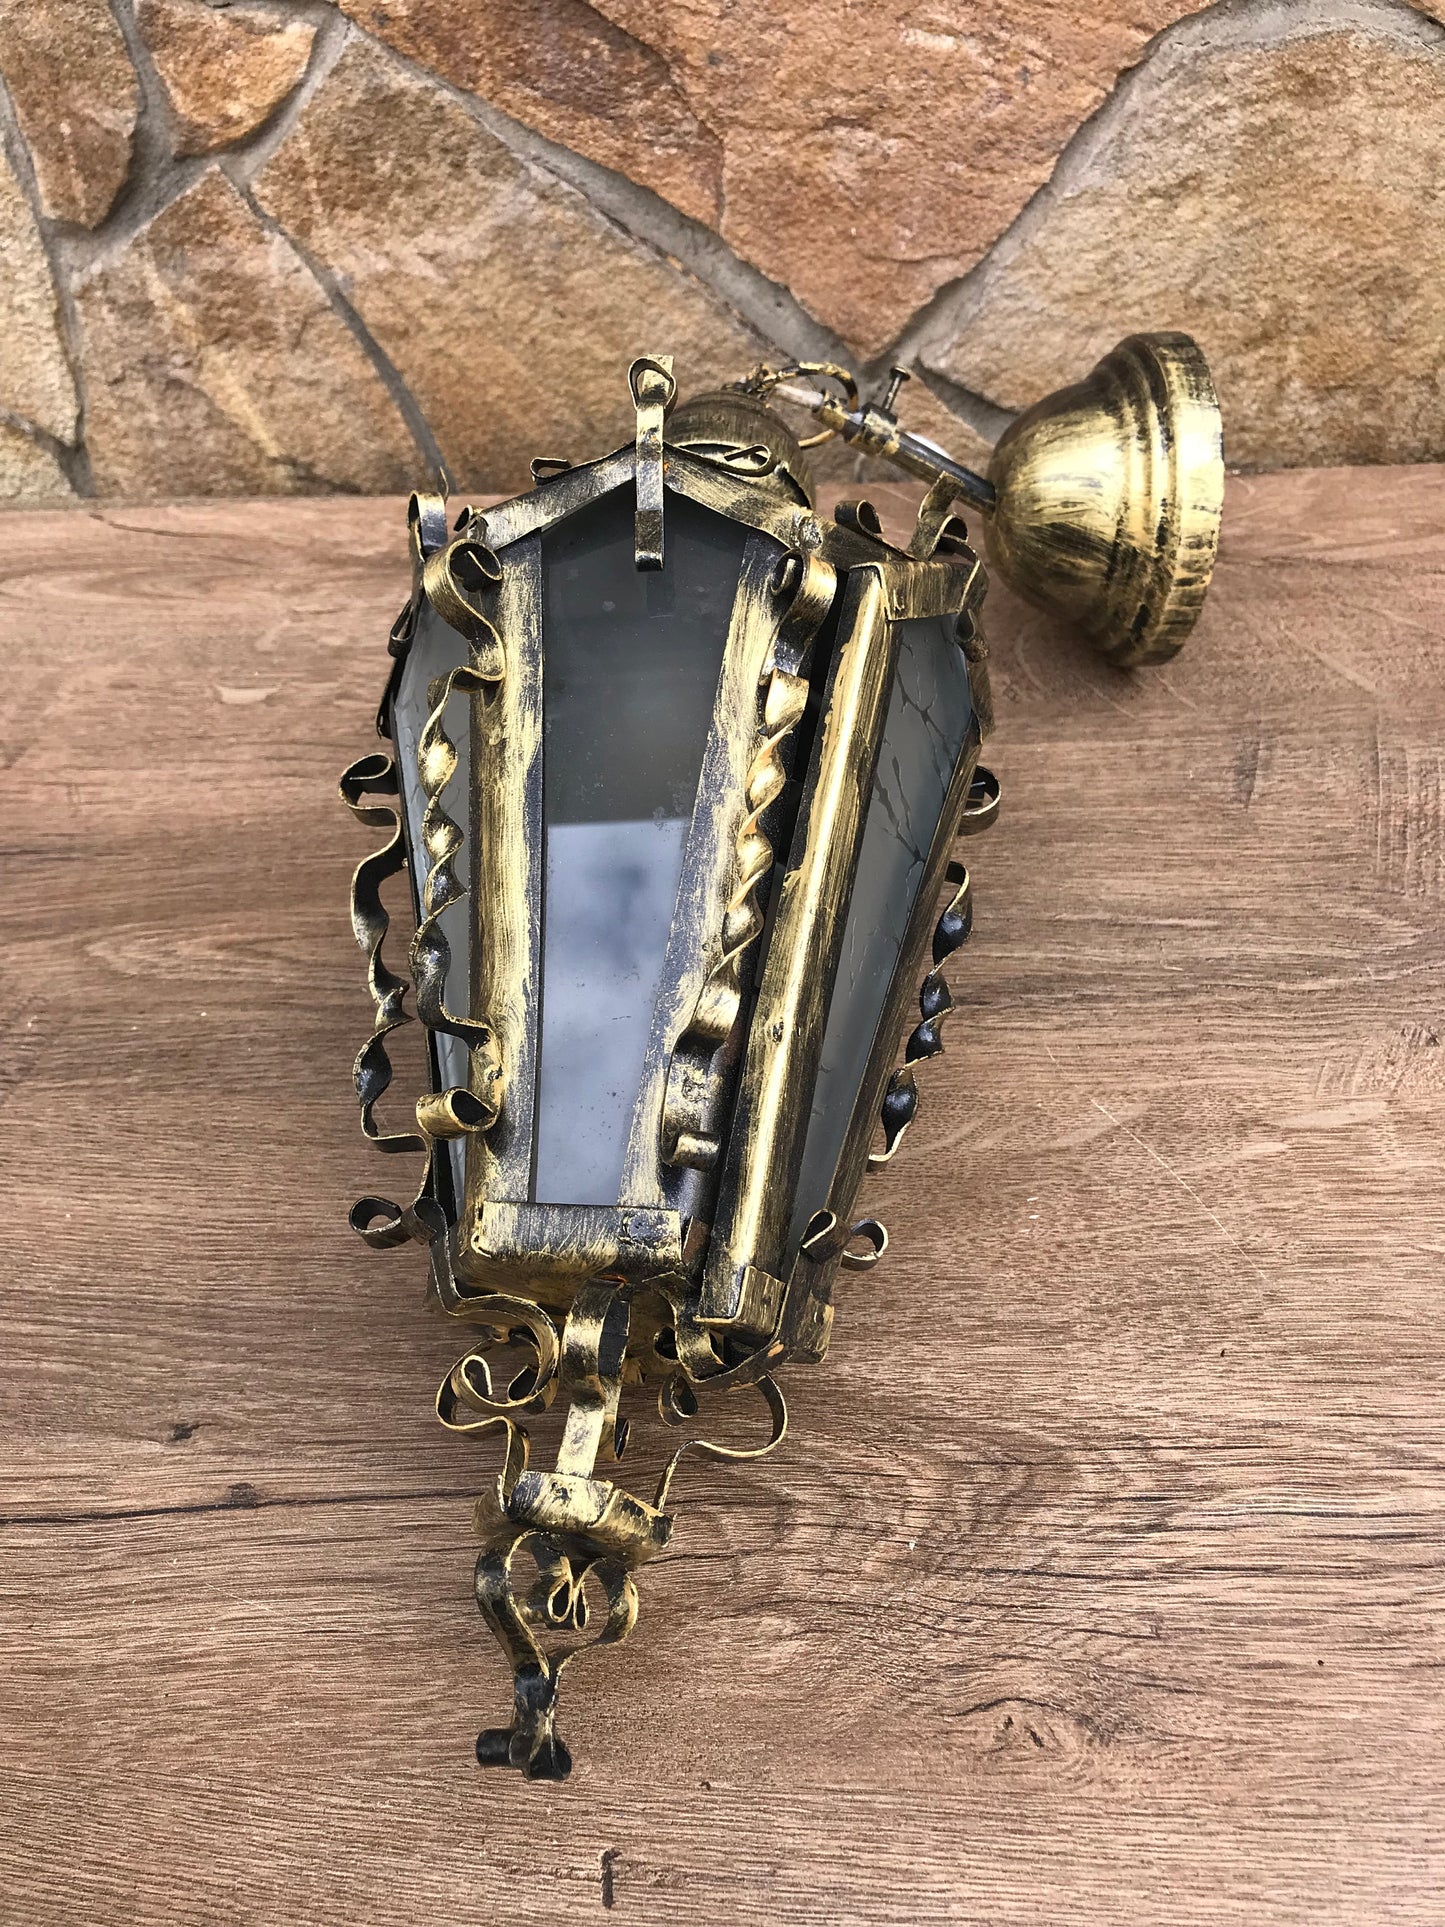 Ceiling sconce, ceiling lamp, ceiling light, ceiling lighting, lantern, wall lamp, chandelier, porch lamp, sconce,sconce light,light fixture